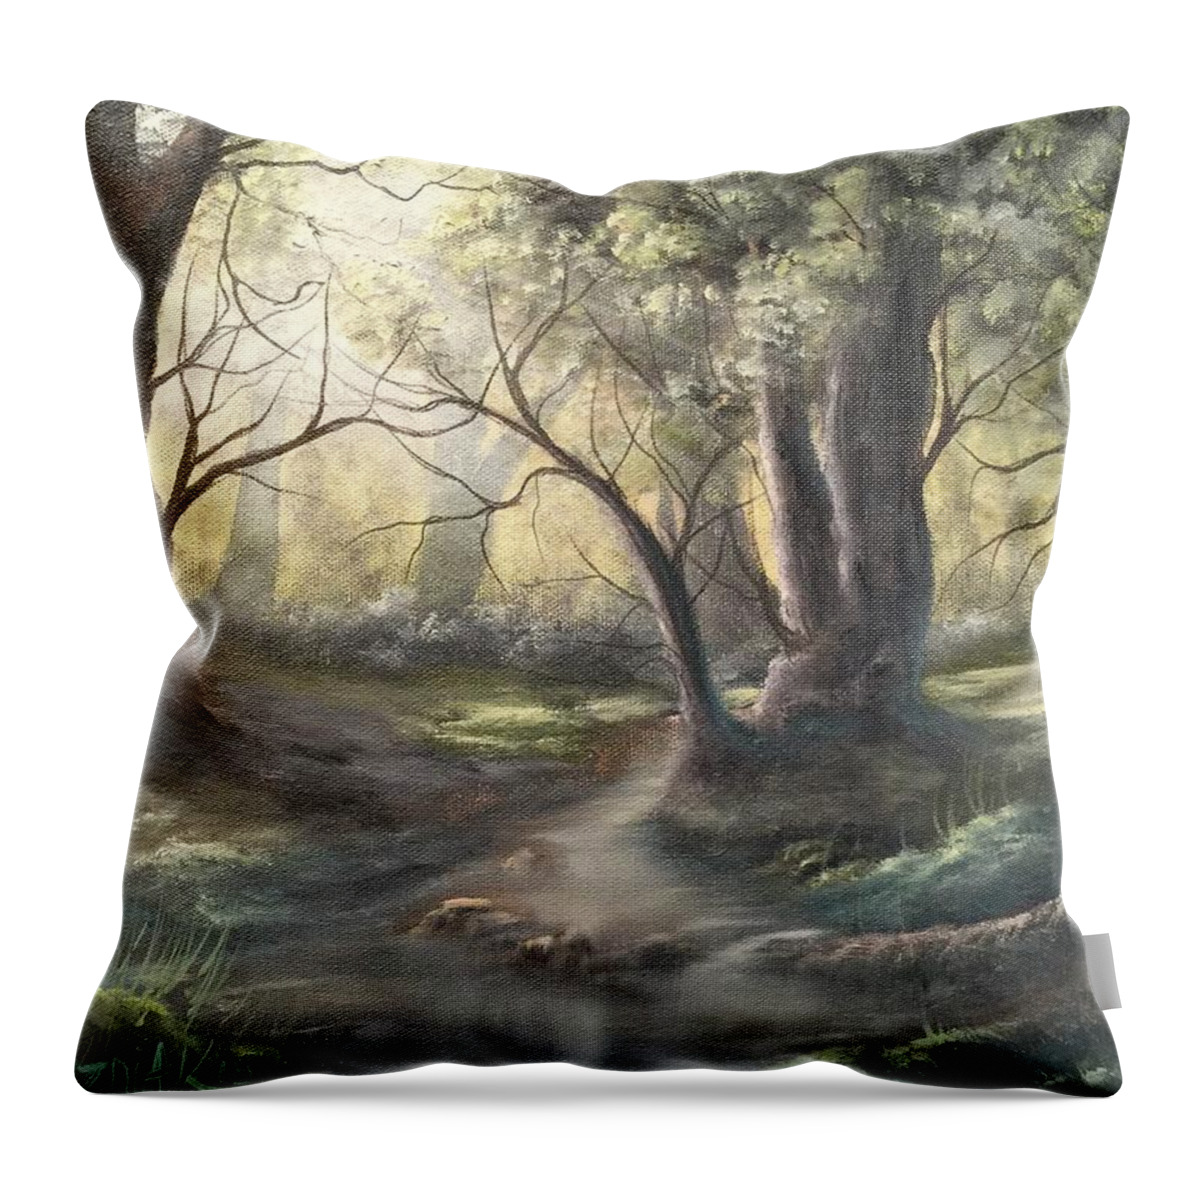 Forest Trees Water Sky River Rocks Landscape Oak Trees Grass Throw Pillow featuring the painting Deep Forest by Justin Wozniak